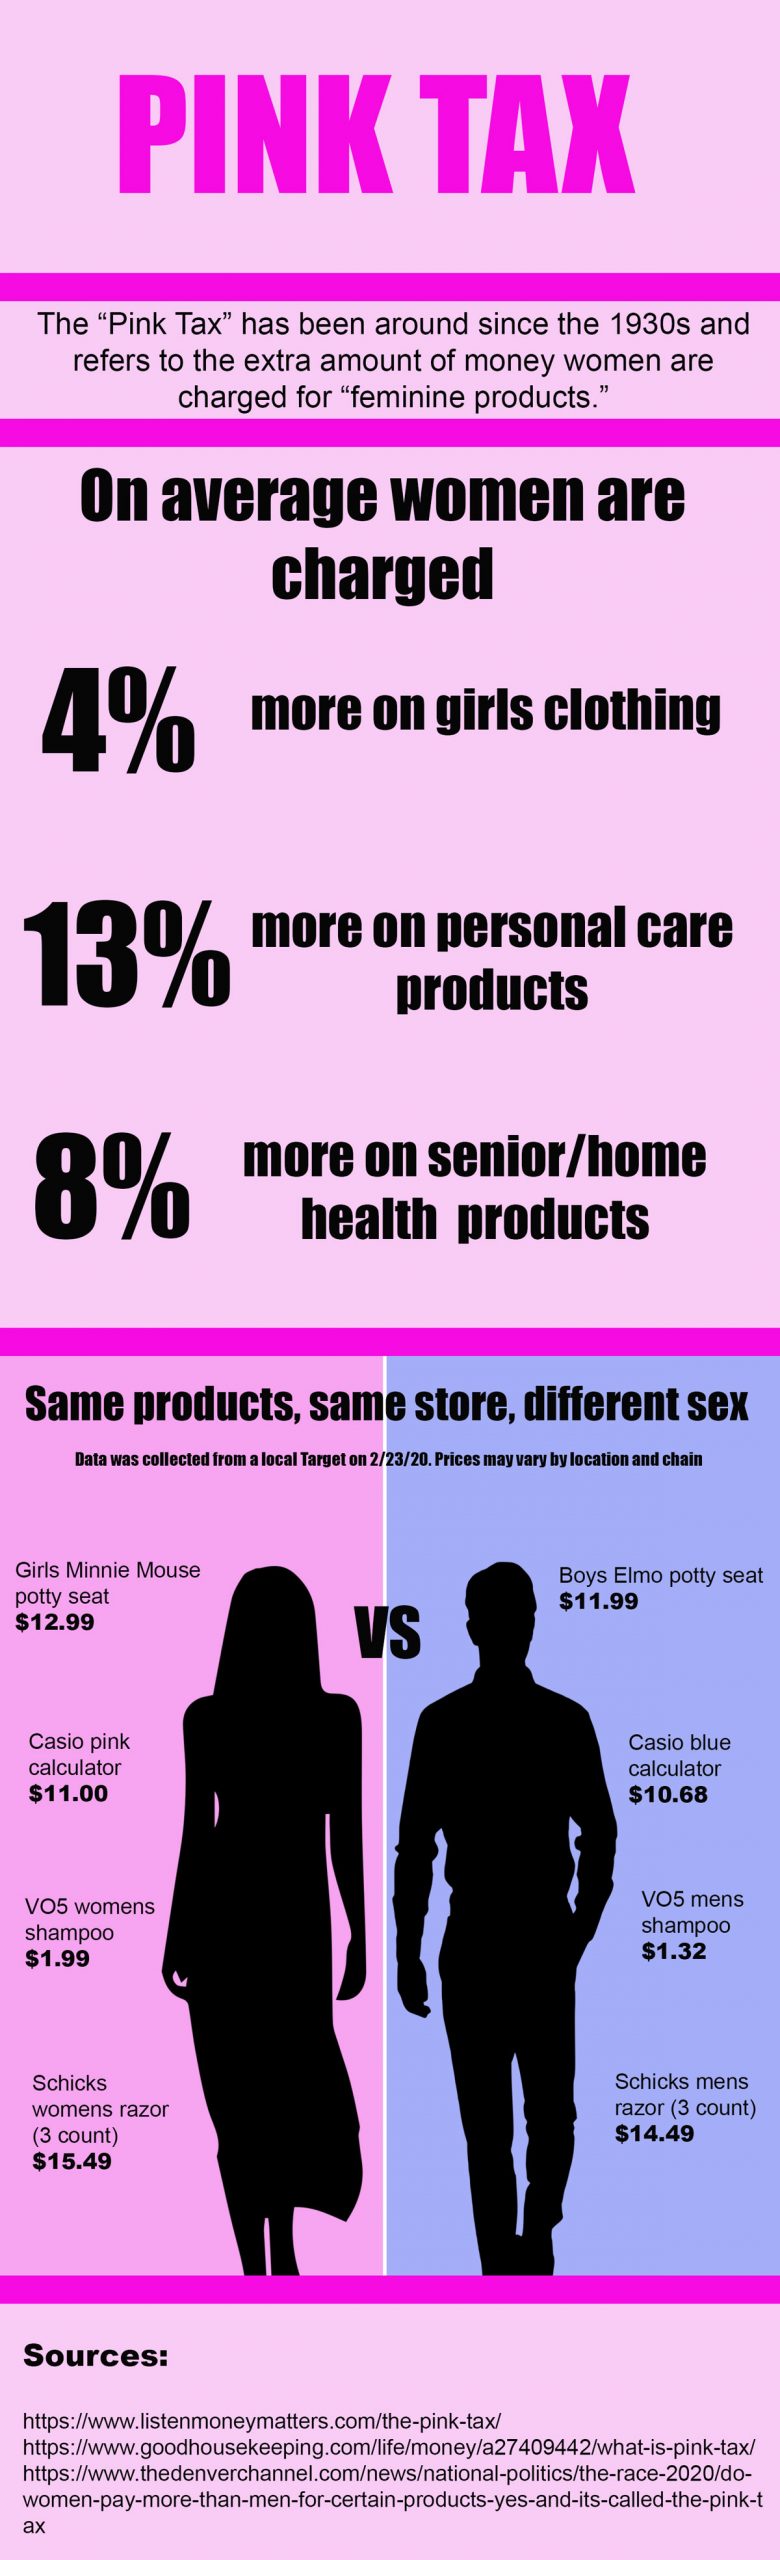 INFOGRAPHIC: Infographic giving detailed information on pink tax. Male and woman silhouettes standing side by side with prices on the same products. Infographic by The Signal reporter Sarah Daniels